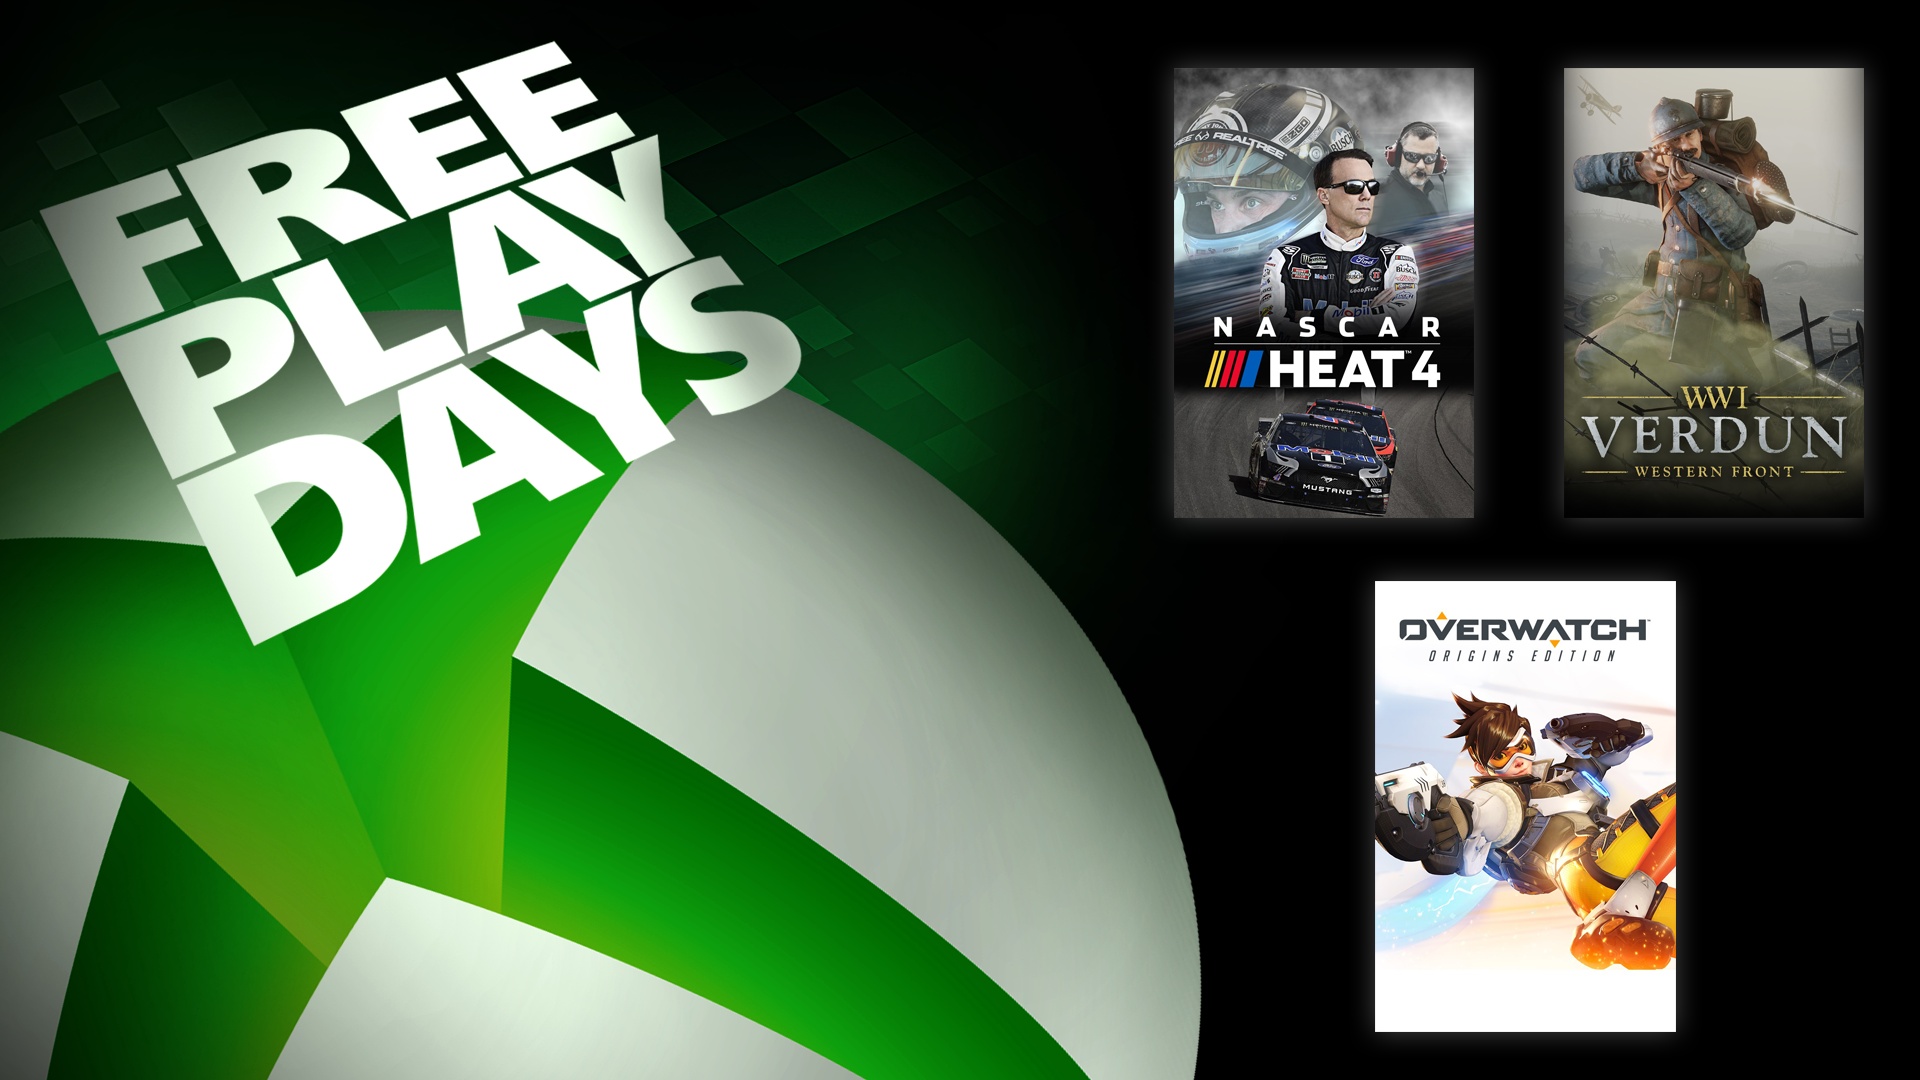 Free Xbox Live play dates - March 12